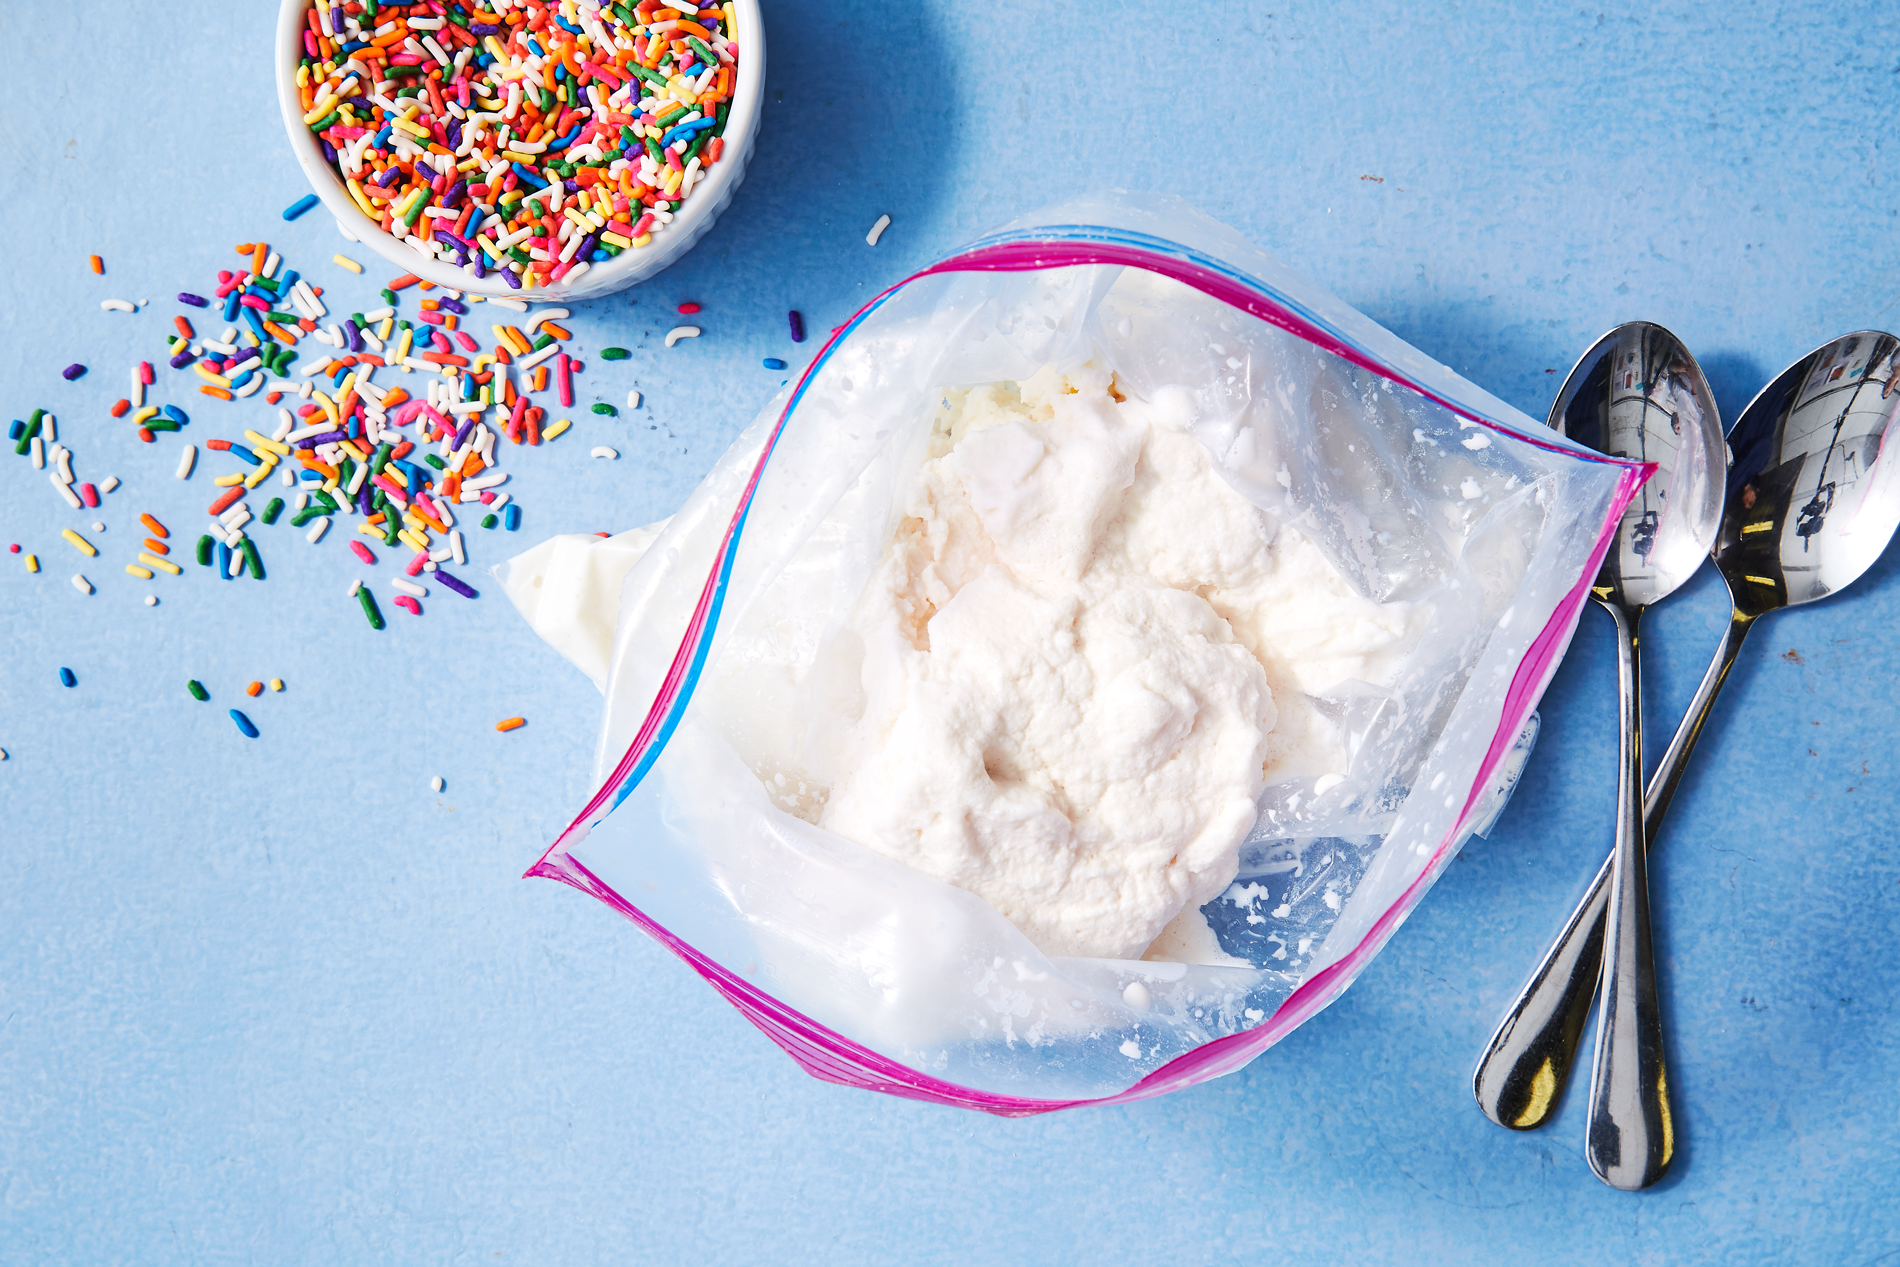 Ice cream in a plastic bag, two spoons, and a jar of sprinkles